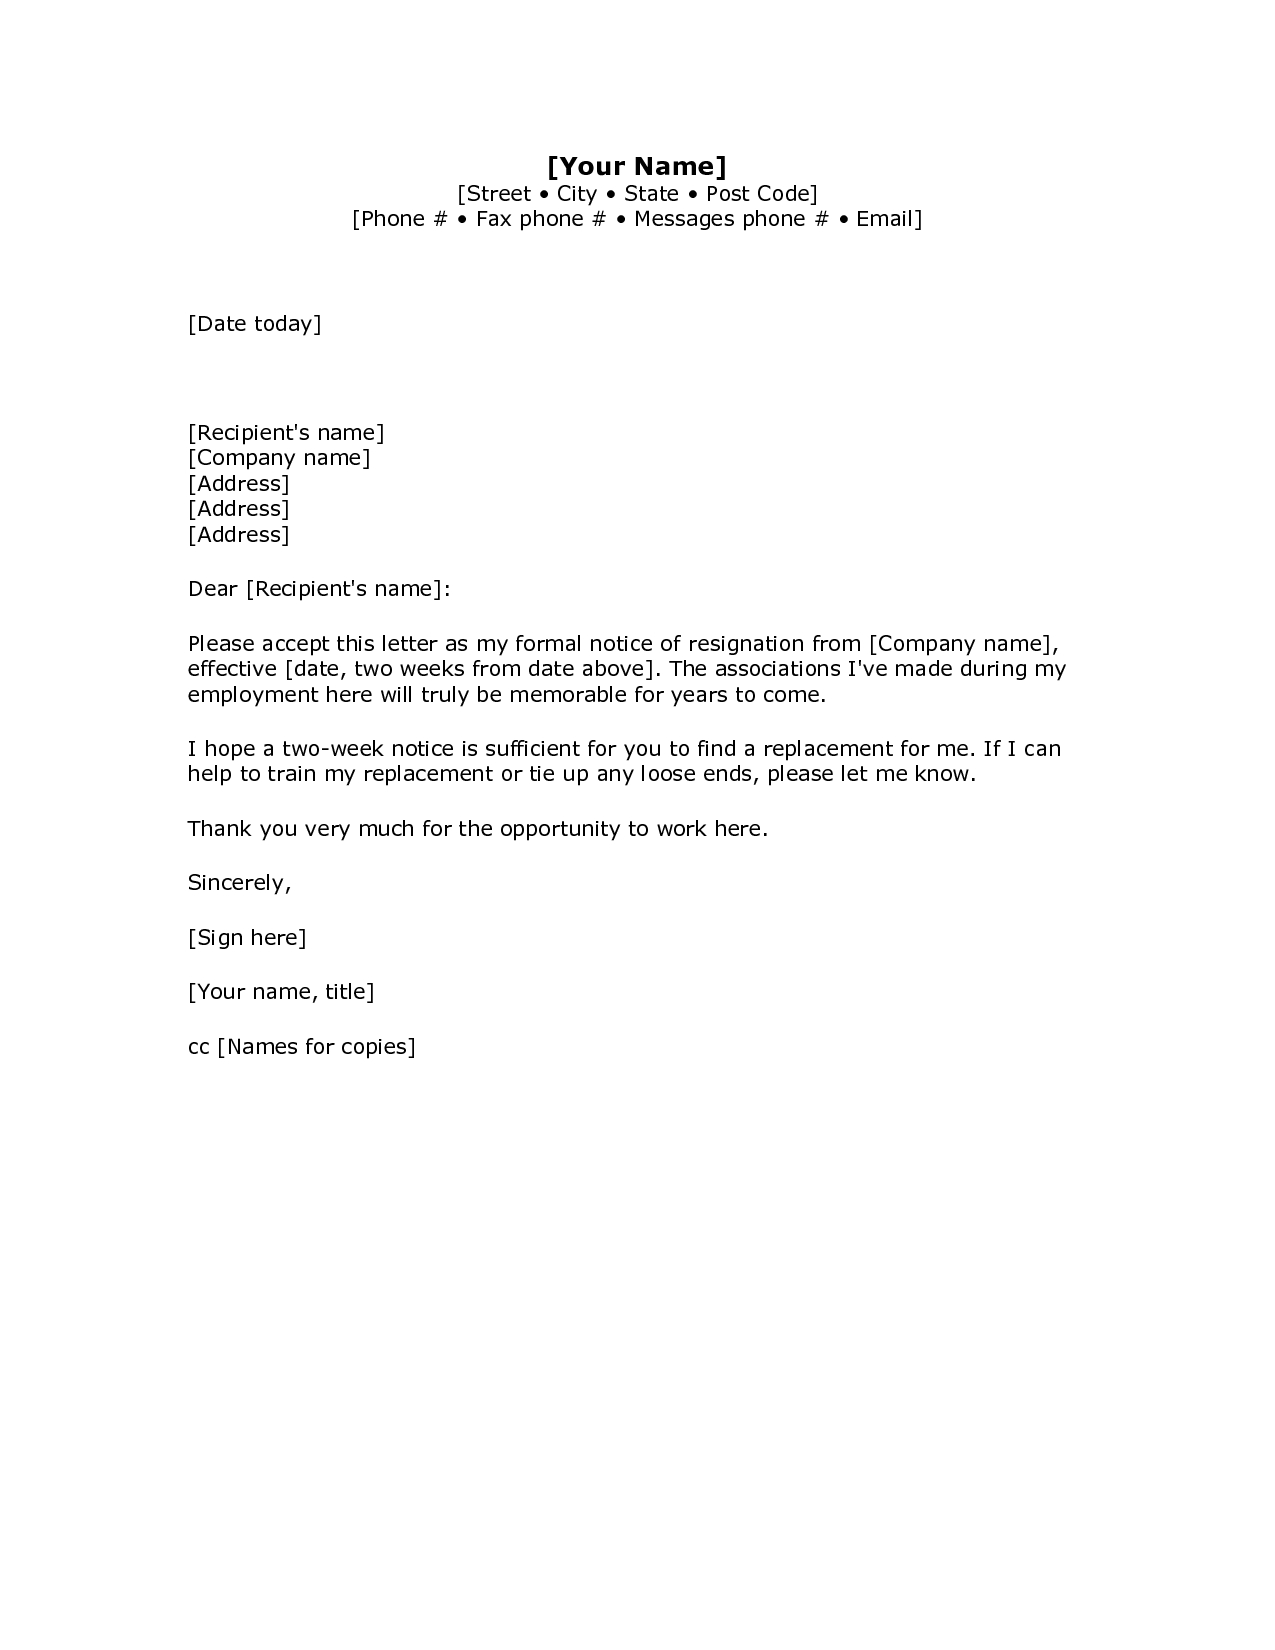 Opt Offer Letter Template - 2 Weeks Notice Letter Resignation Letter Week Notice Words Hdwriting